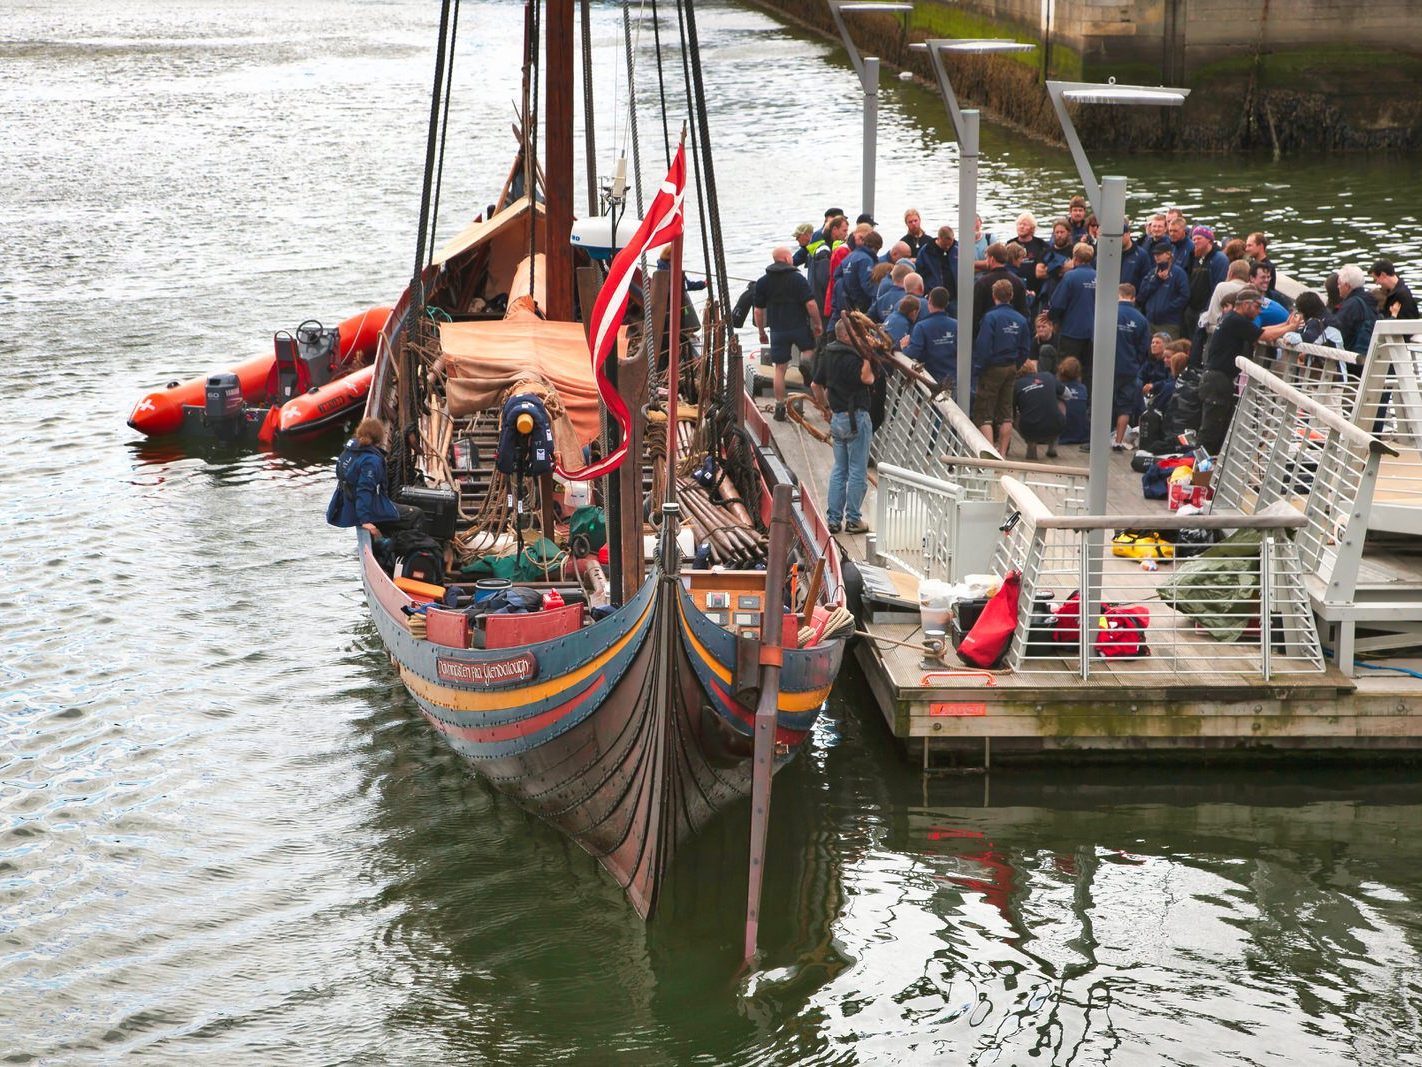 THE SEA STALLION FROM GLEANDALOUGH WAS LIFTED INTO THE LIFFEY USING A LARGE CRANE 009